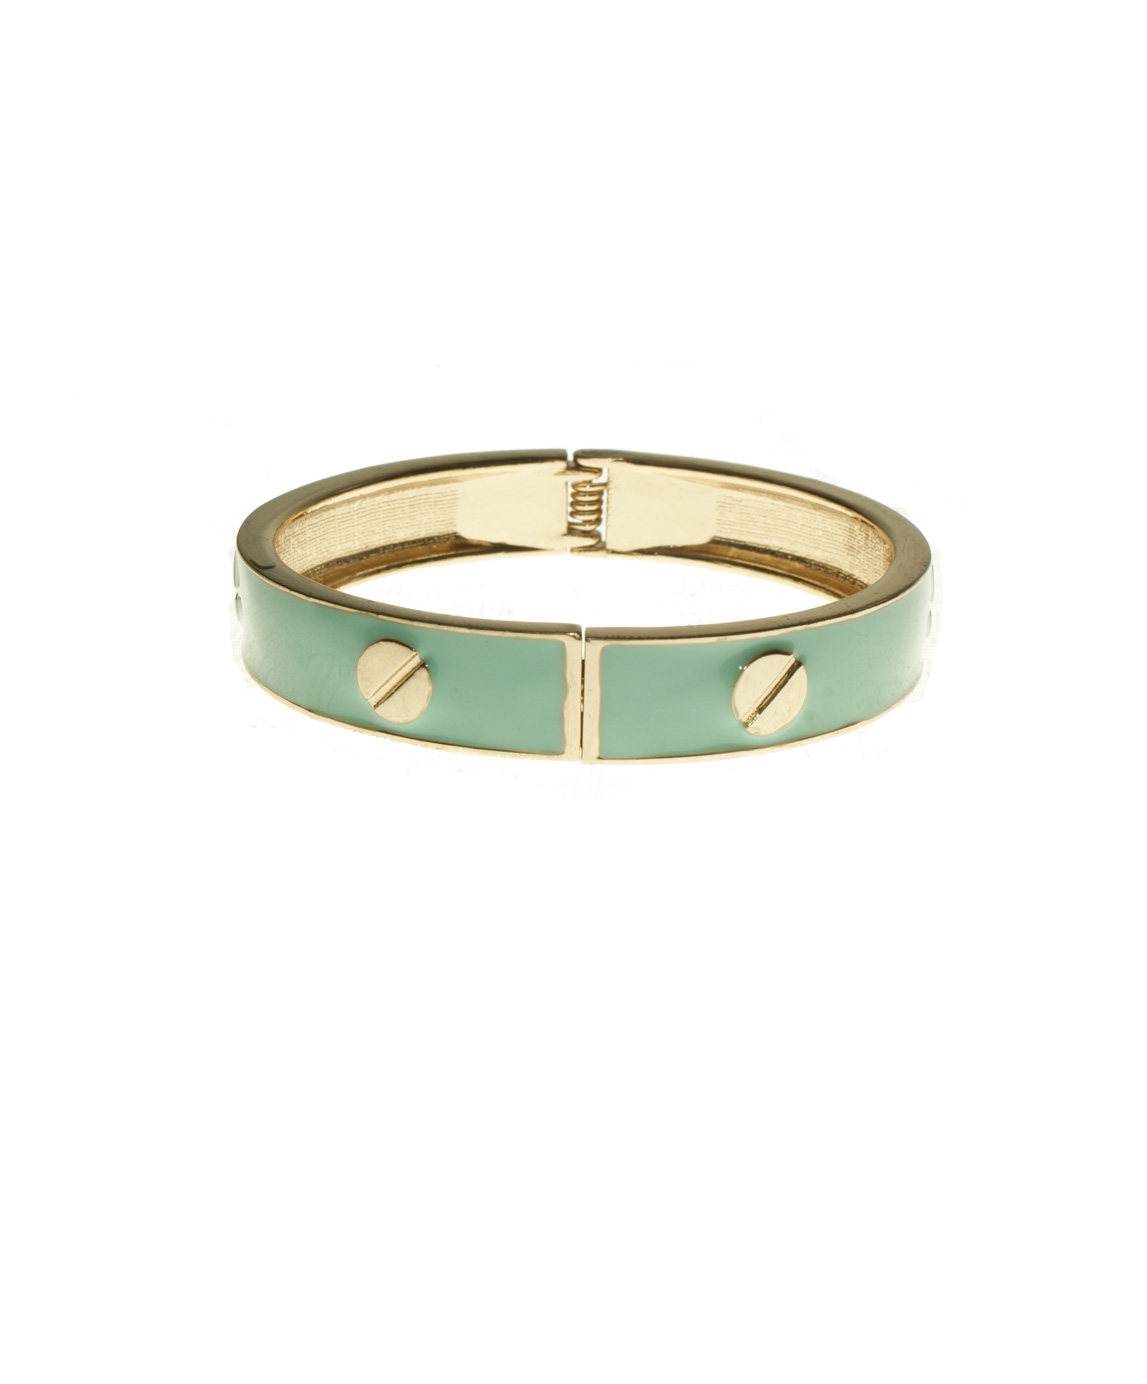 Vintage bangle in green and gold.